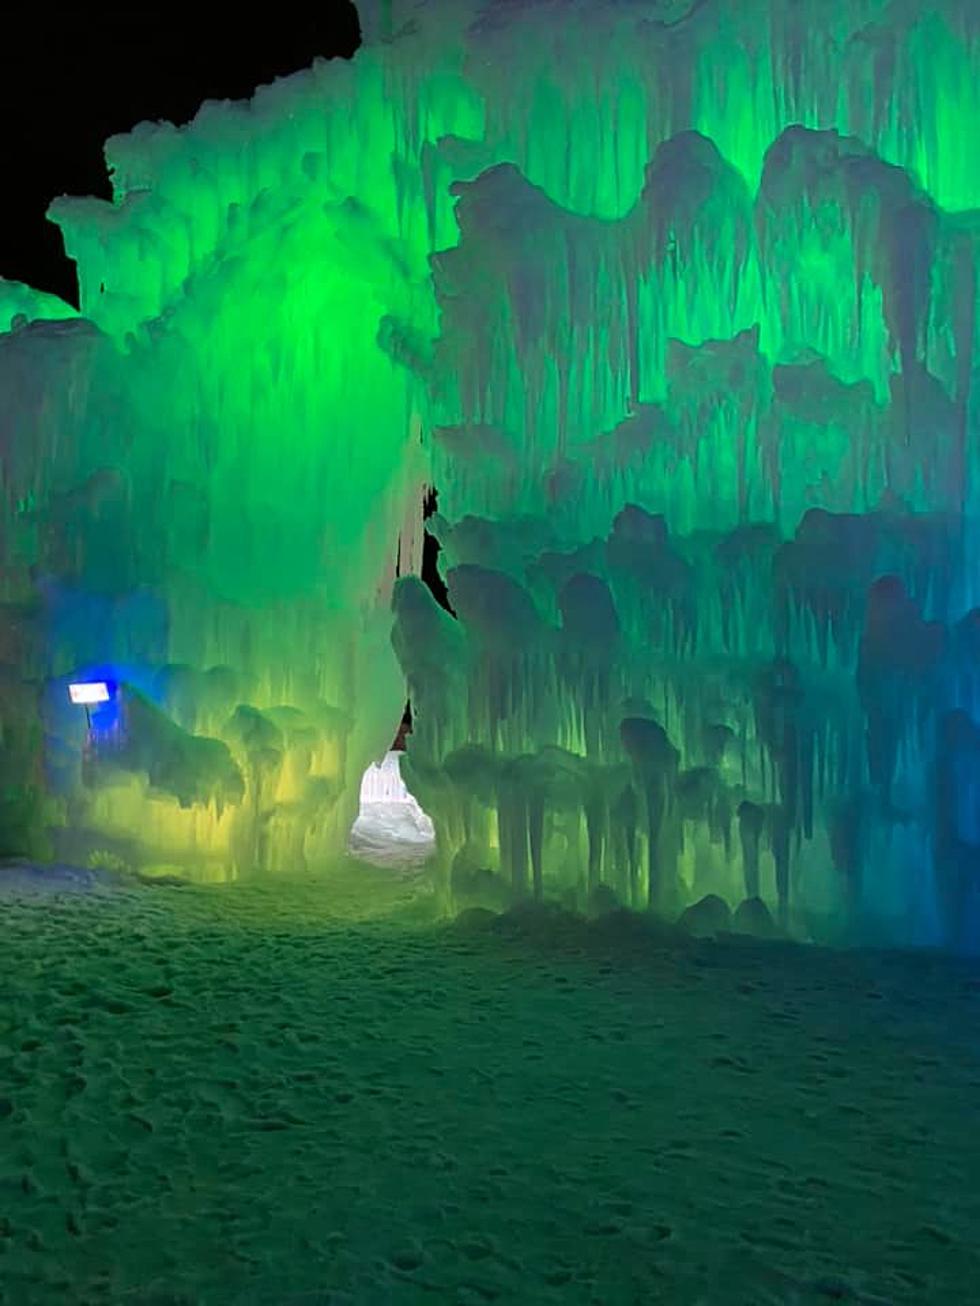 Ice Castles Are Coming Back Bigger and Better Than Ever in North Woodstock, NH, This 2022